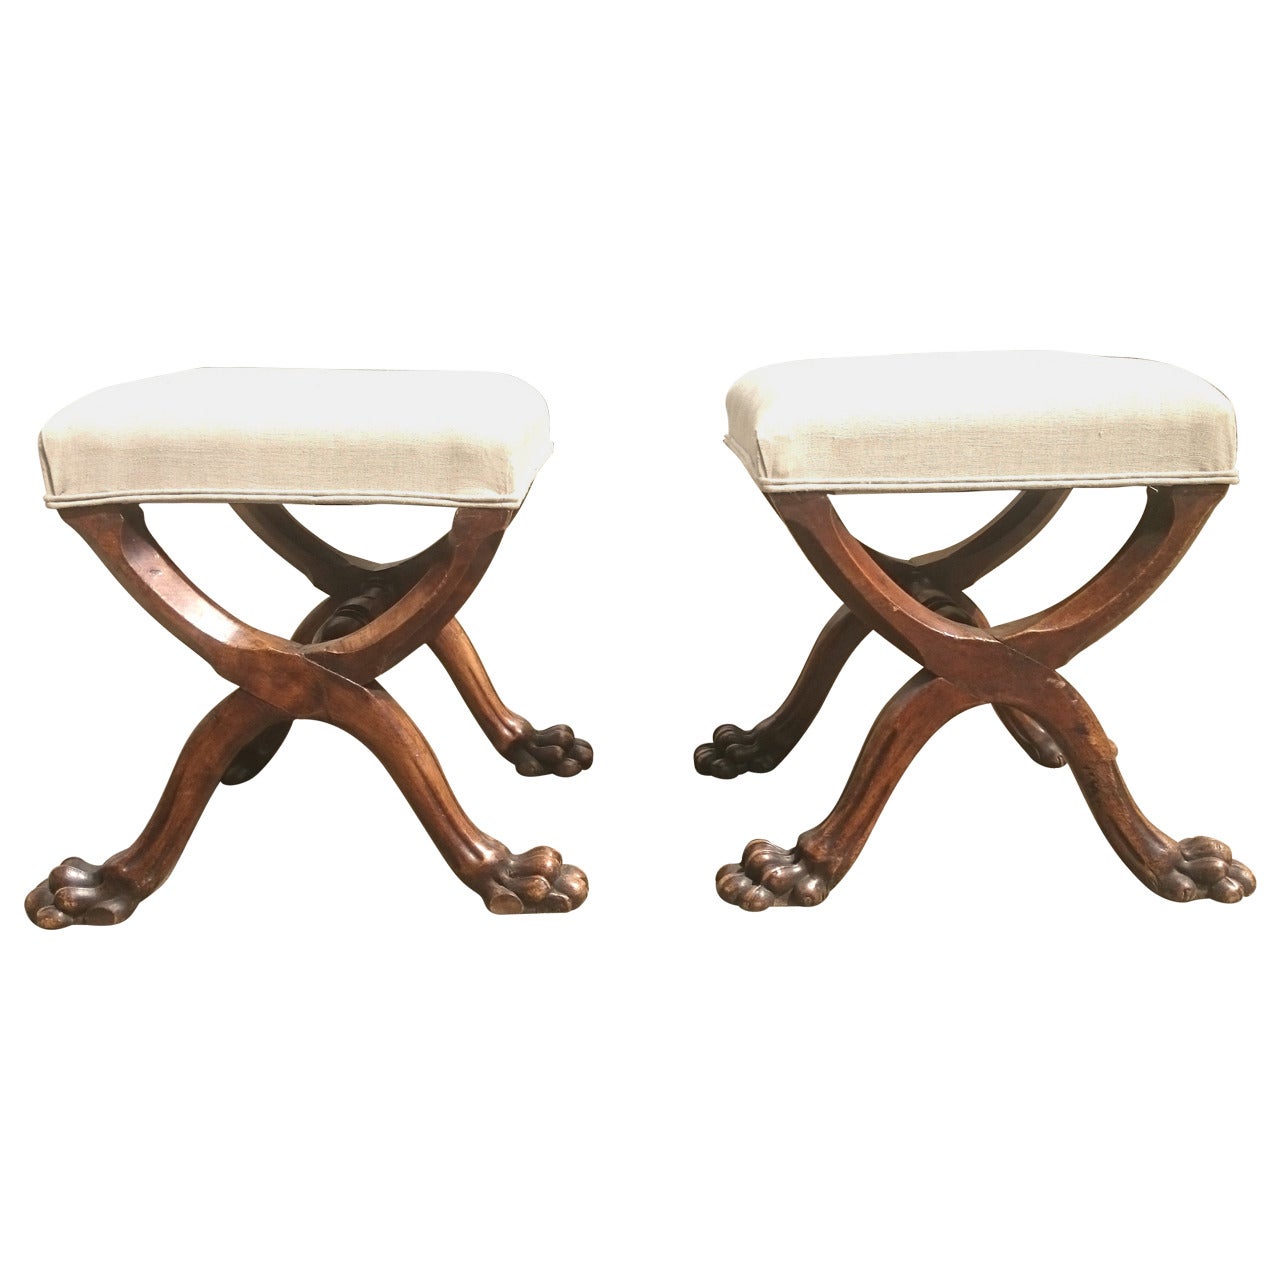 Unusually Fine Quality Pair of Antique Stools